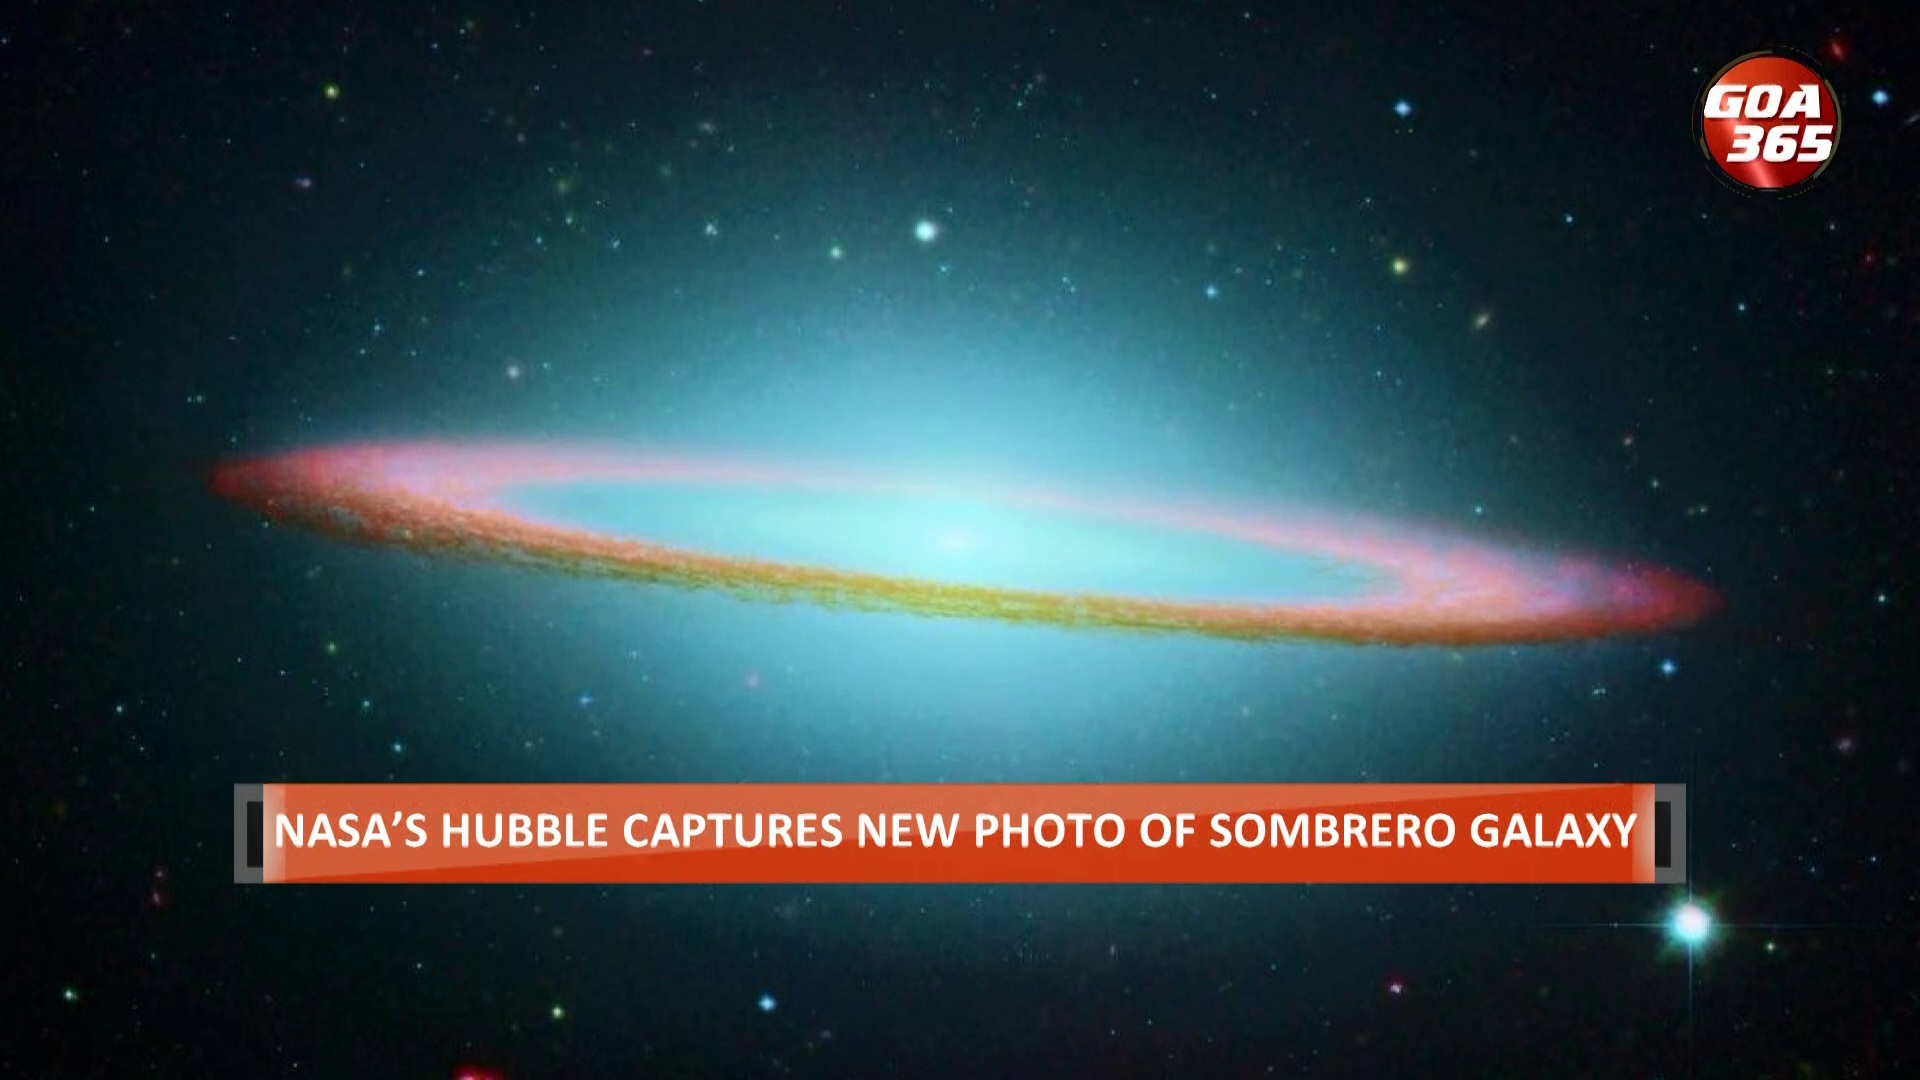 Hubble captures stunning images of Sombrero Galaxy  